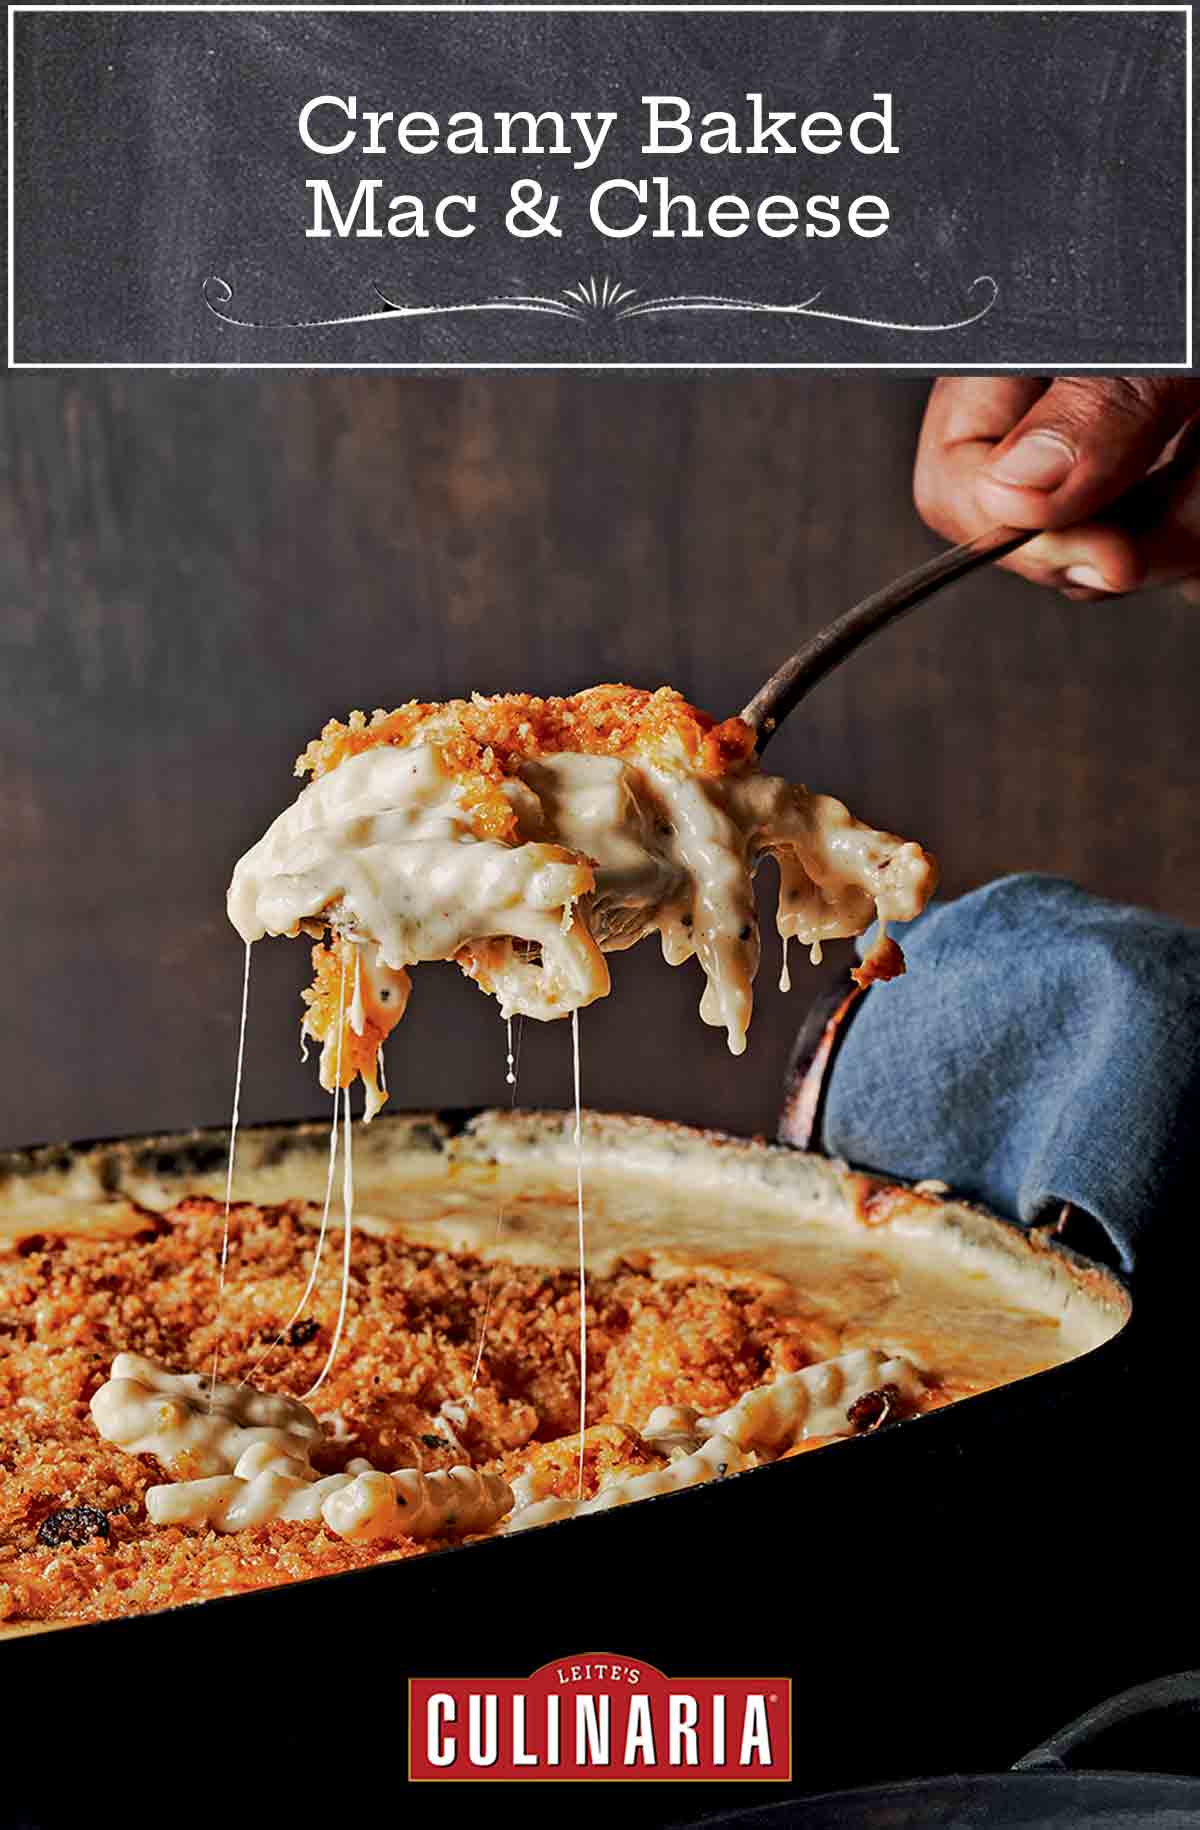 A scoop of creamy baked mac and cheese with crunchy topping being lifted from a casserole dish.